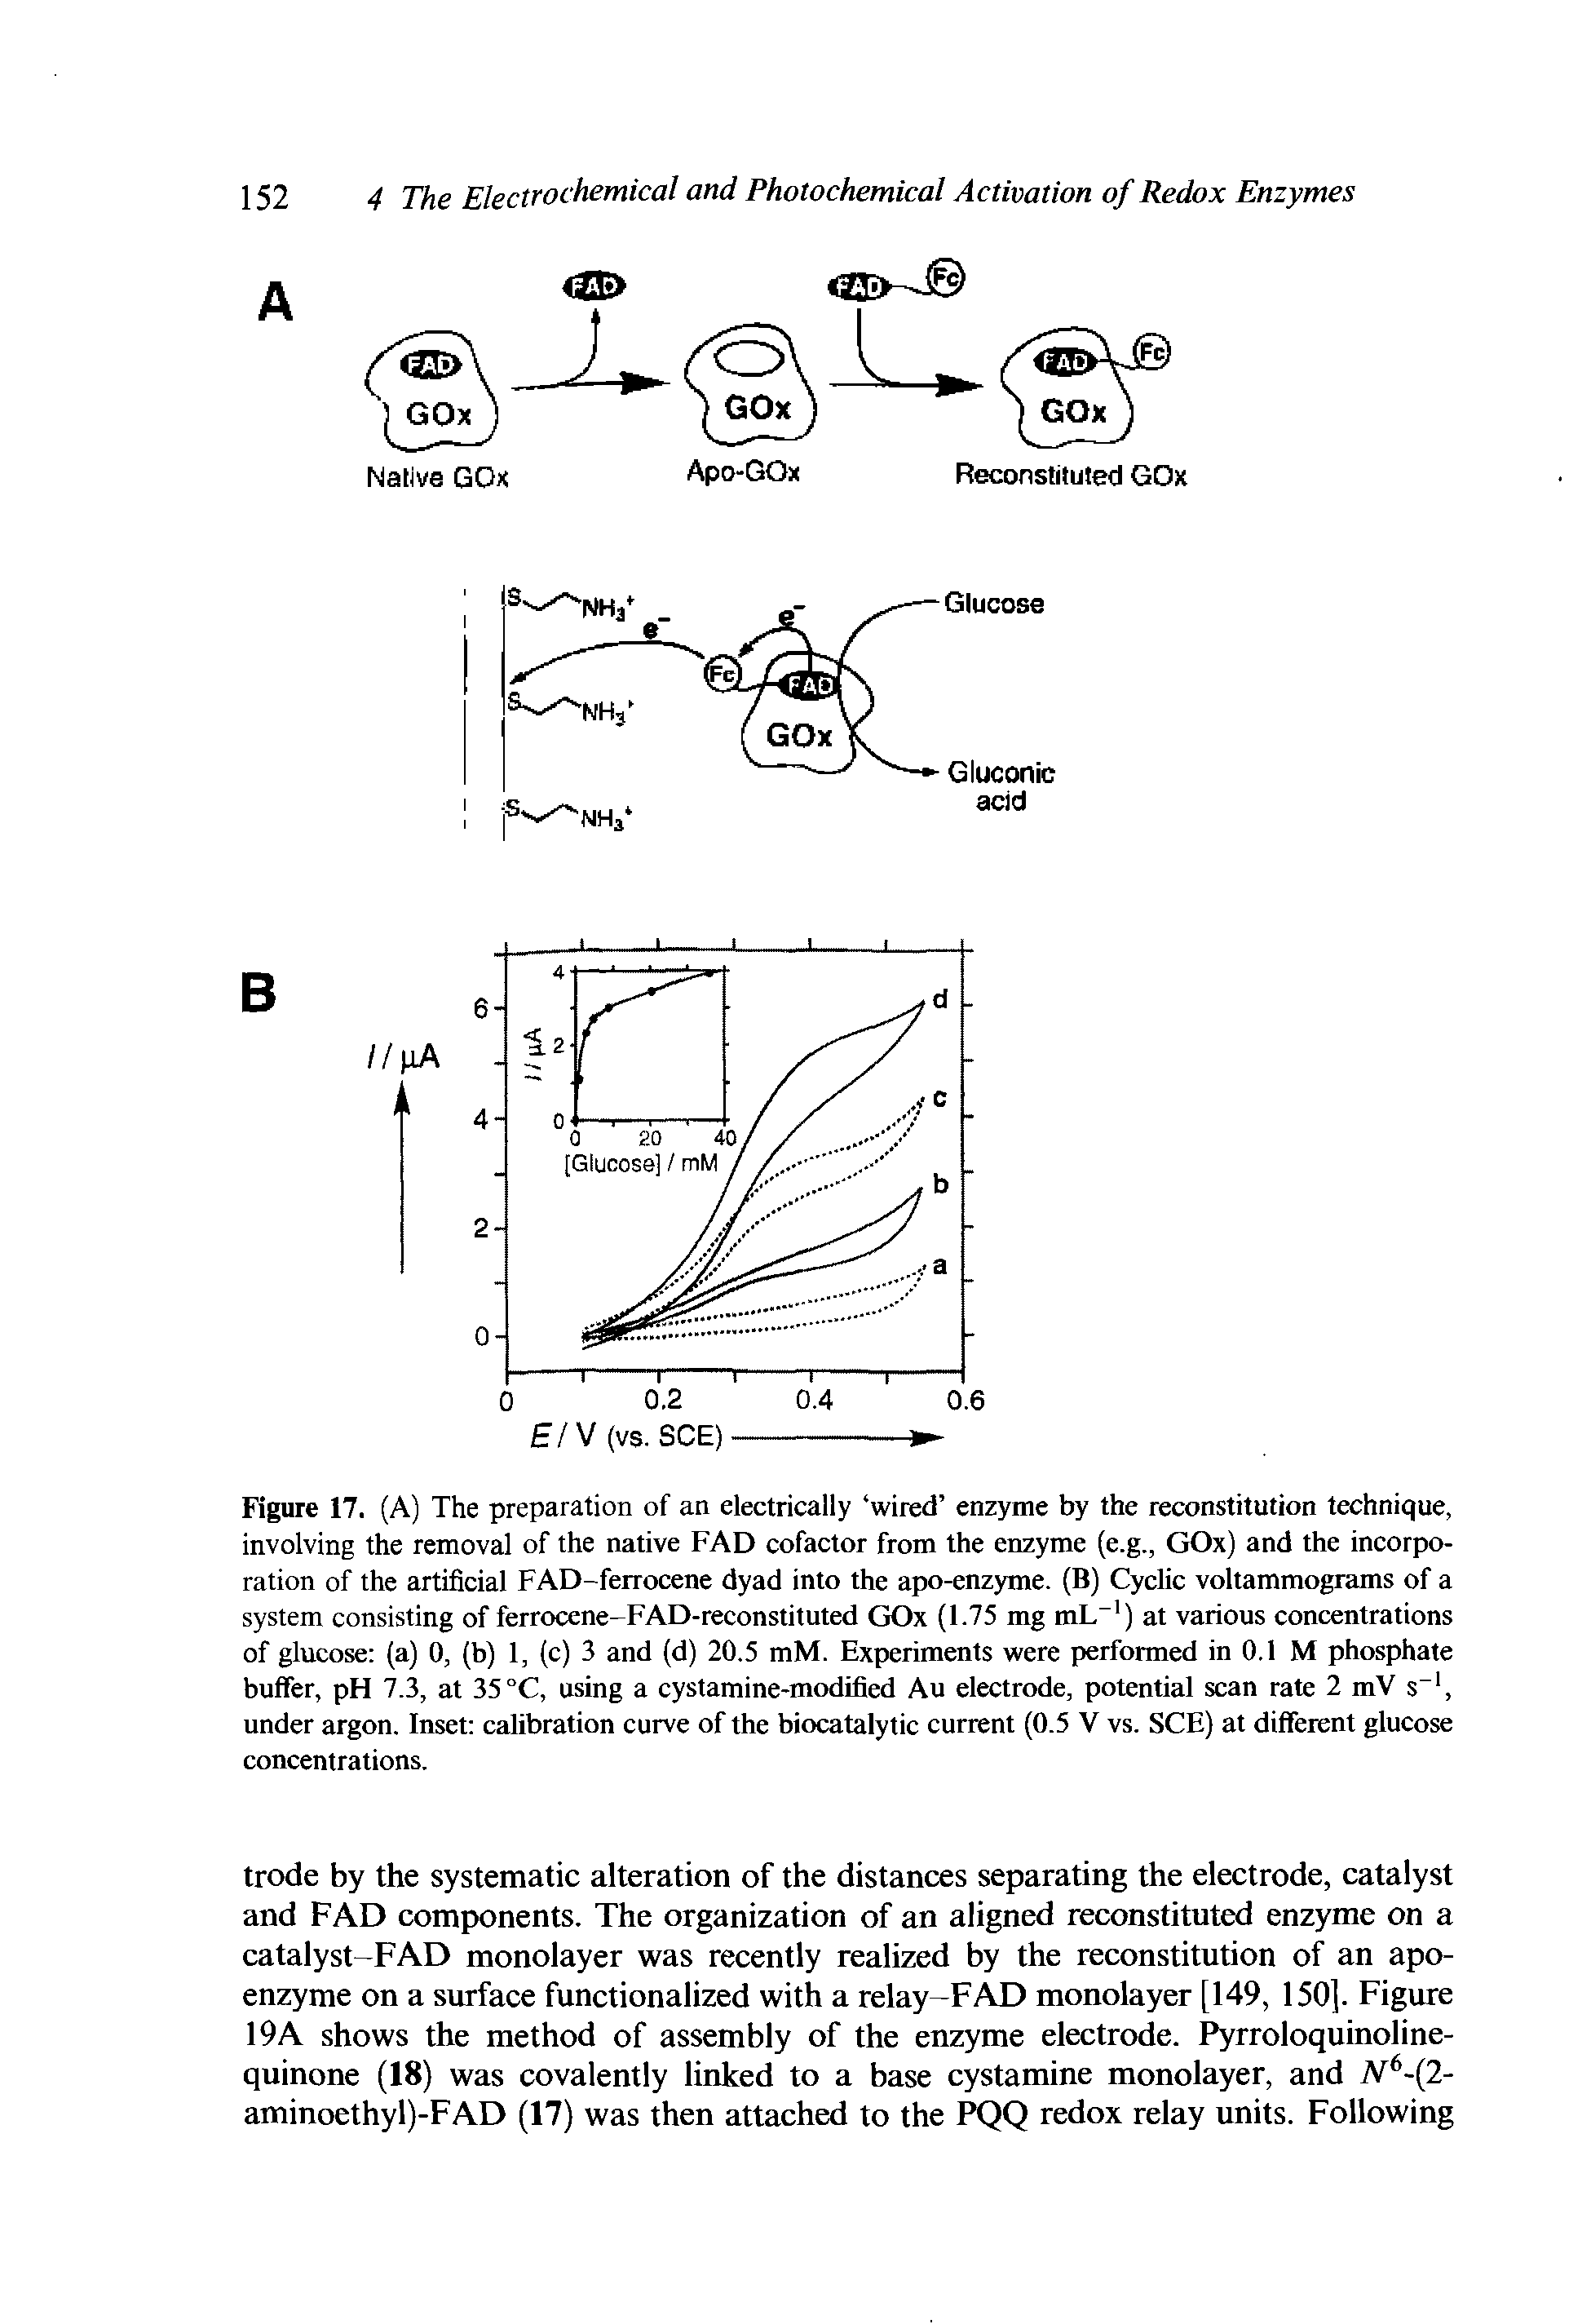 Figure 17. (A) The preparation of an electrically wired enzyme by the reconstitution technique, involving the removal of the native FAD cofactor from the enzyme (e.g., GOx) and the incorporation of the artificial FAD-ferrocene dyad into the apo-enzyme. (B) Cyclic voltammograms of a system consisting of ferrocene-FAD-reconstituted GOx (1.75 mg mL ) at various concentrations of glucose (a) 0, (b) 1, (c) 3 and (d) 20.5 mM. Experiments were performed in 0.1 M phosphate buffer, pH 7.3, at 35 C, using a cystamine-modified Au electrode, potential scan rate 2 mV s , under argon. Inset calibration curve of the biocatalytic current (0.5 V vs. SCE) at different glucose concentrations.